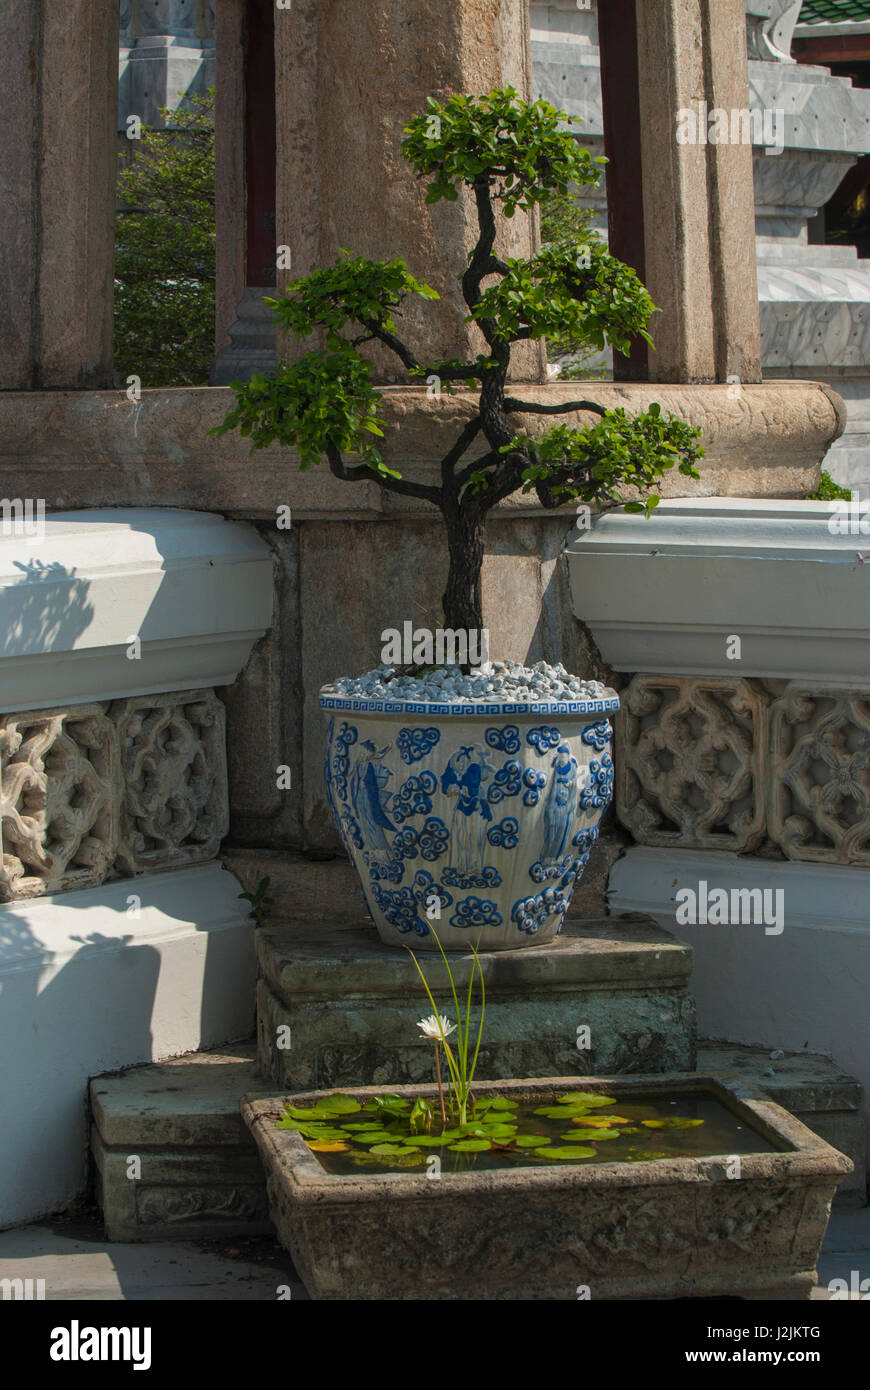 Bonsai tree in a blue and white ceramic pot, and a stone water ...